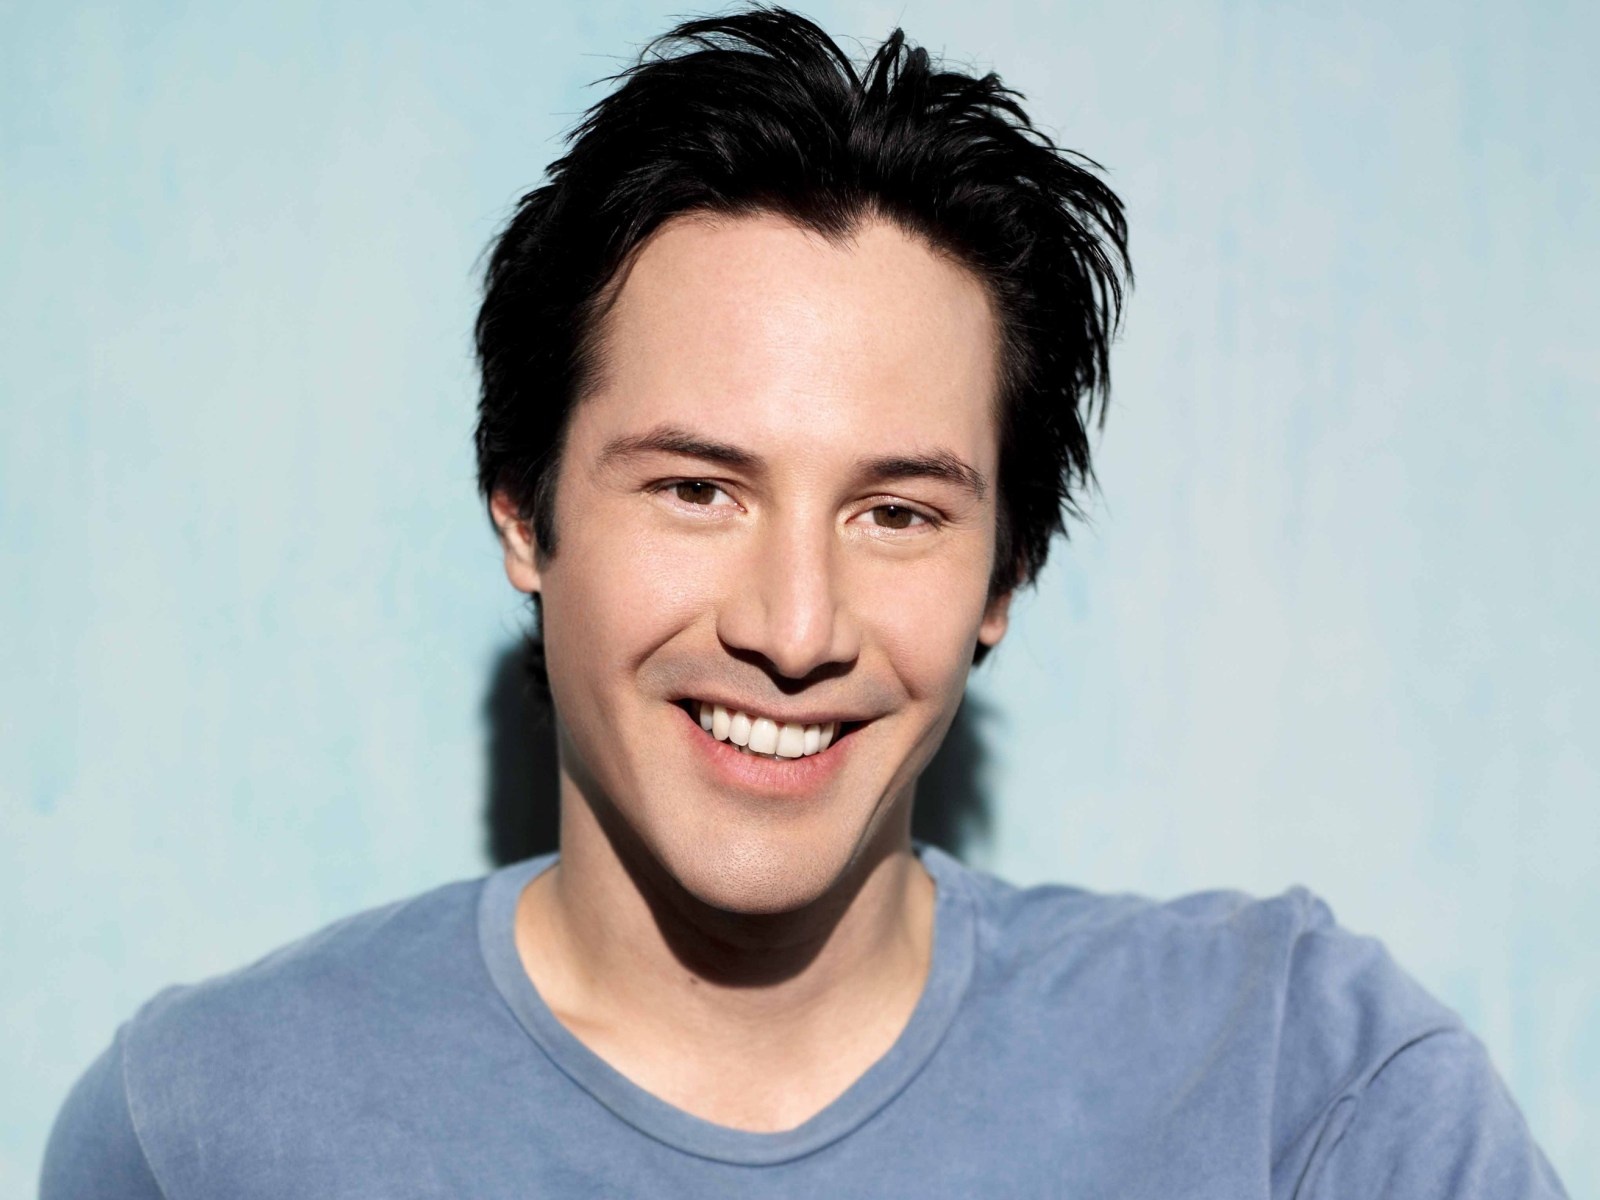 keanu reeves smile wallpaper 53956 55687 hd wallpapers | Stay at Home Mum.com.au